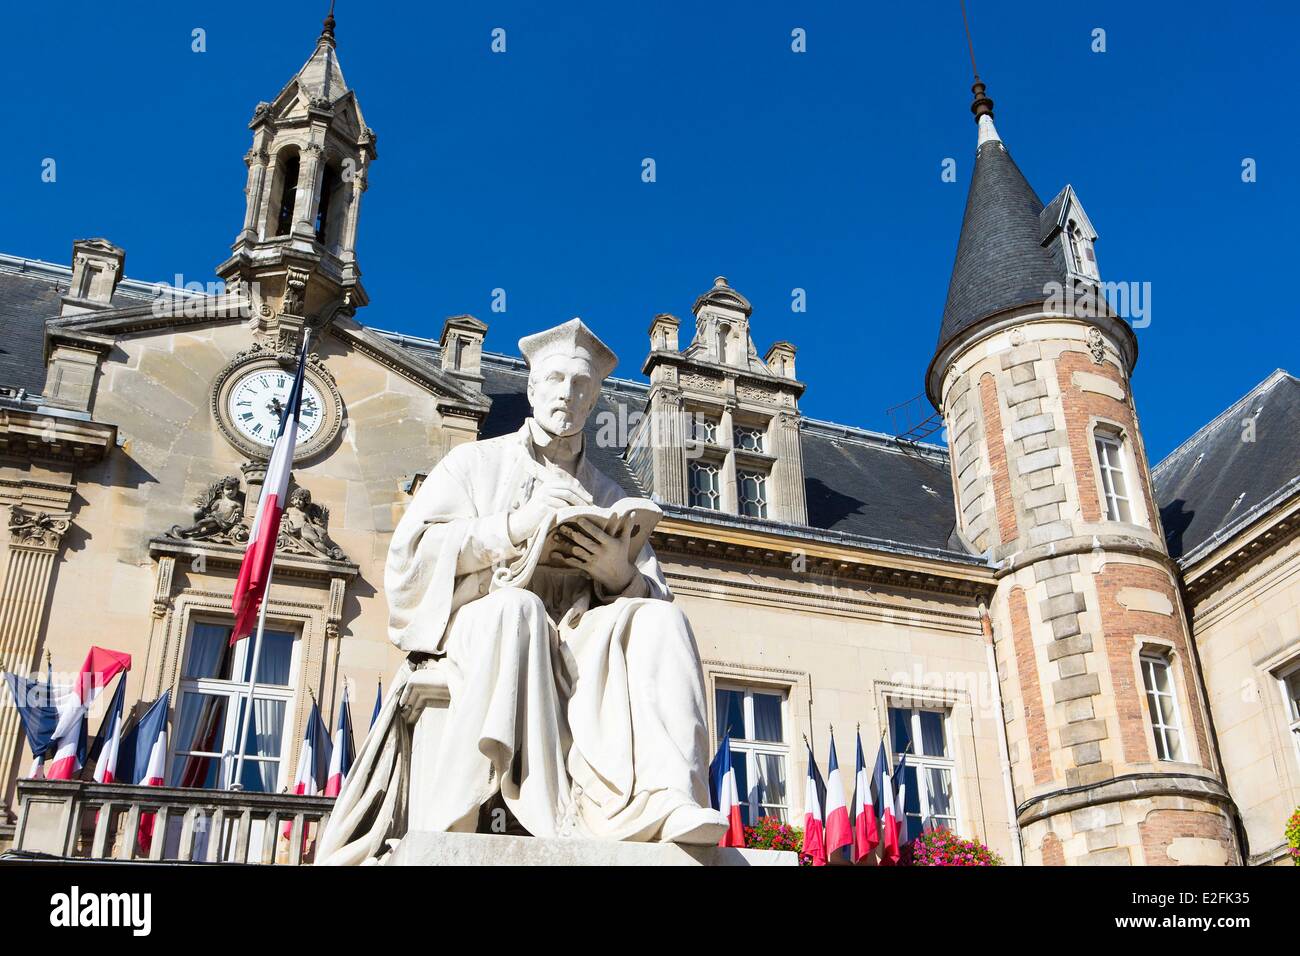 France, Seine et Marne, Melun, Jacques Amyot statue in front of the townhall Stock Photo